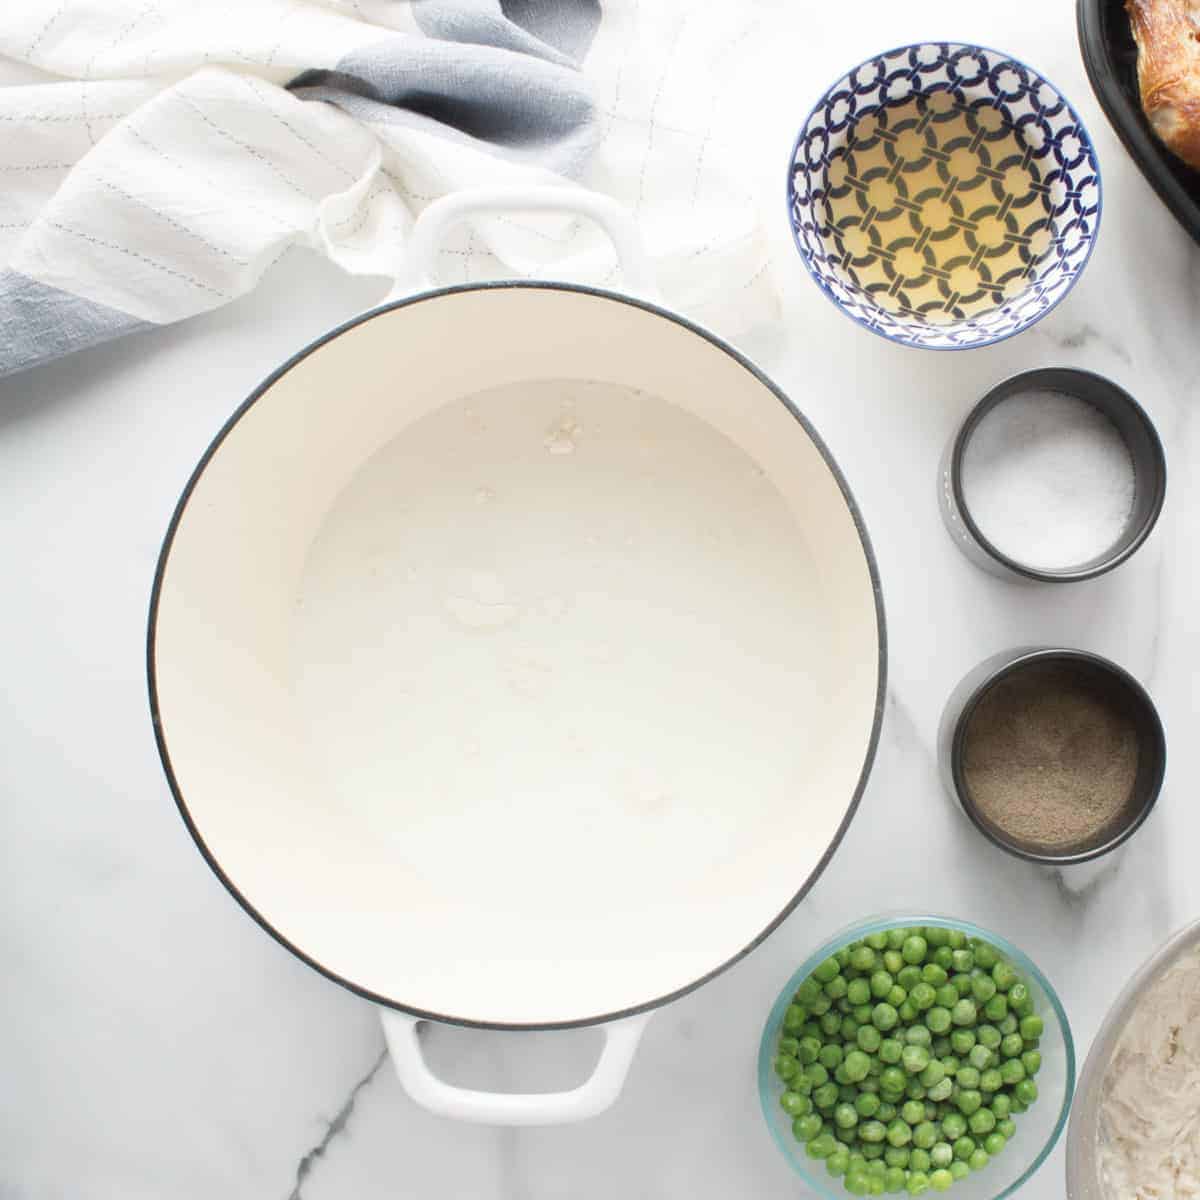 Milk in a white dutch oven with peas on table.